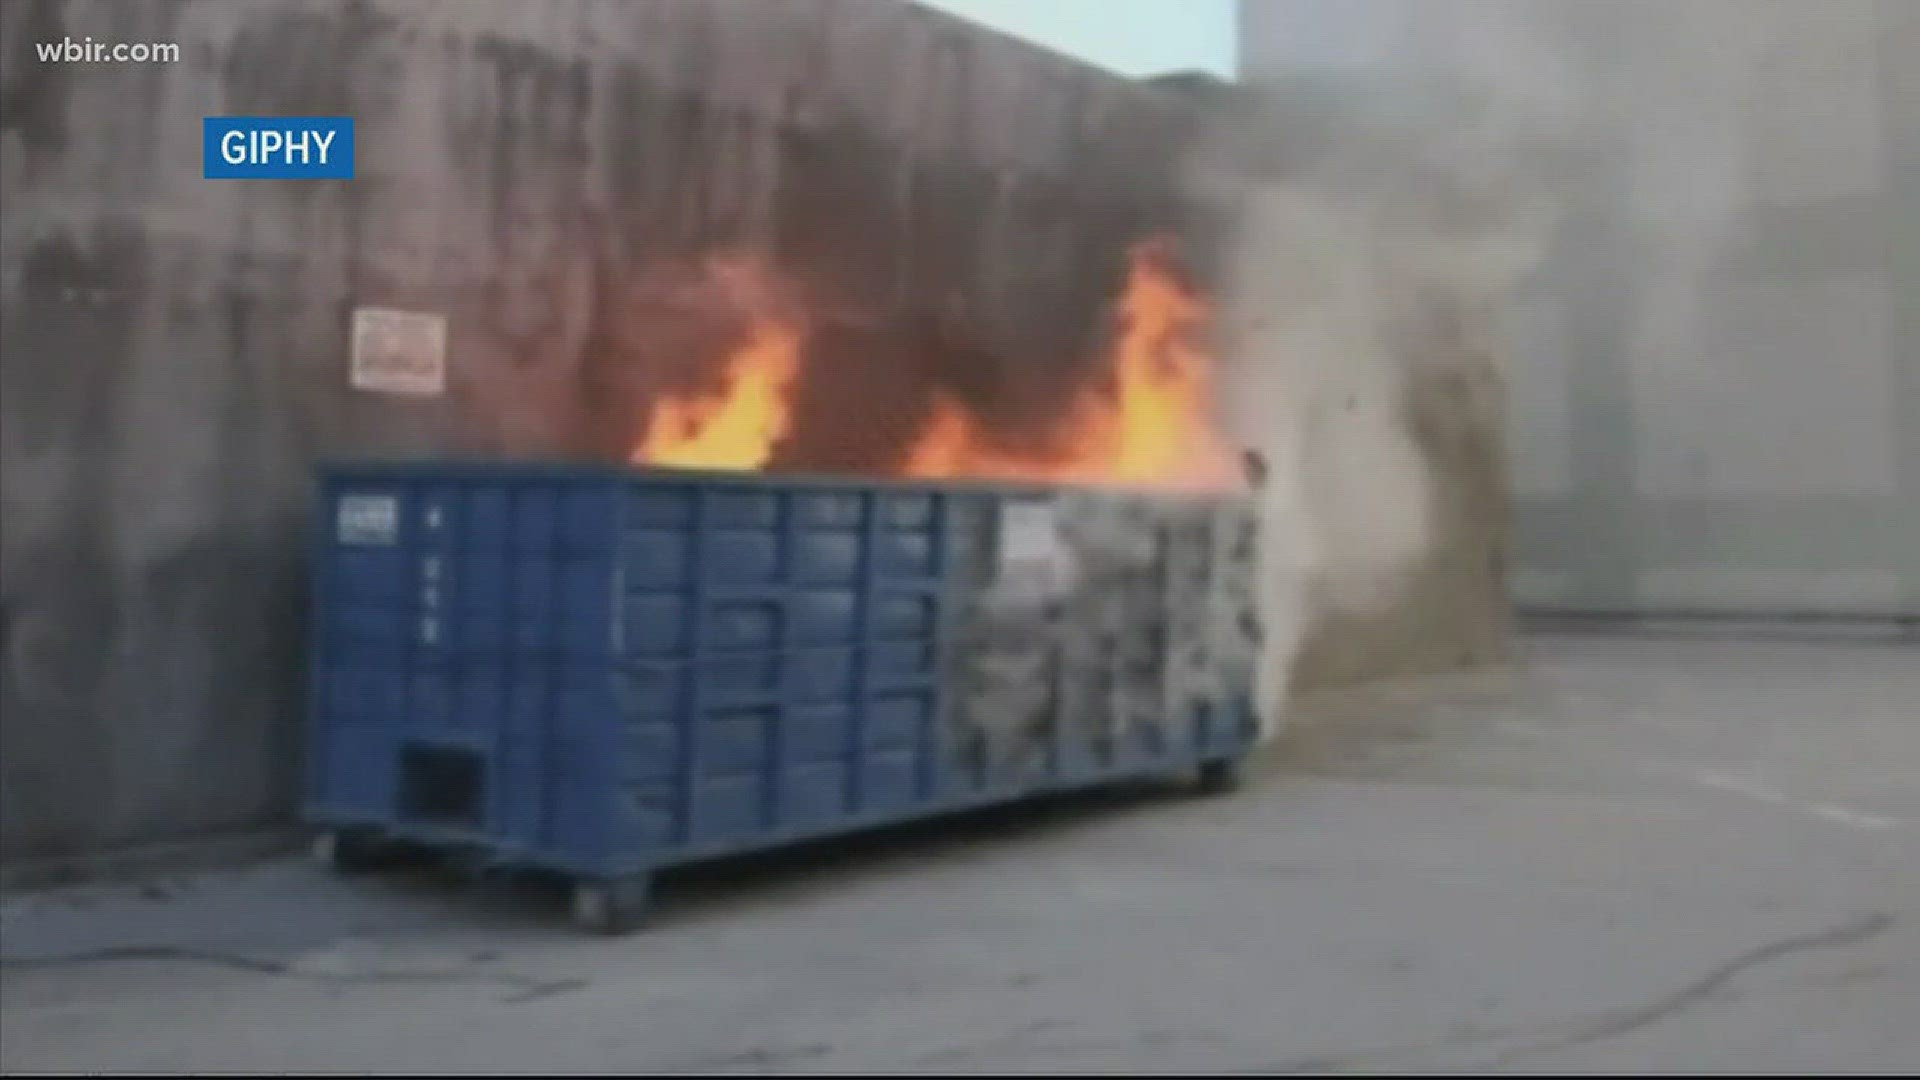 March 7, 2018: "Dumpster fire" is one of the hundreds of new words being added to the Merriam-Webster Dictionary. The term has roots in Knoxville.